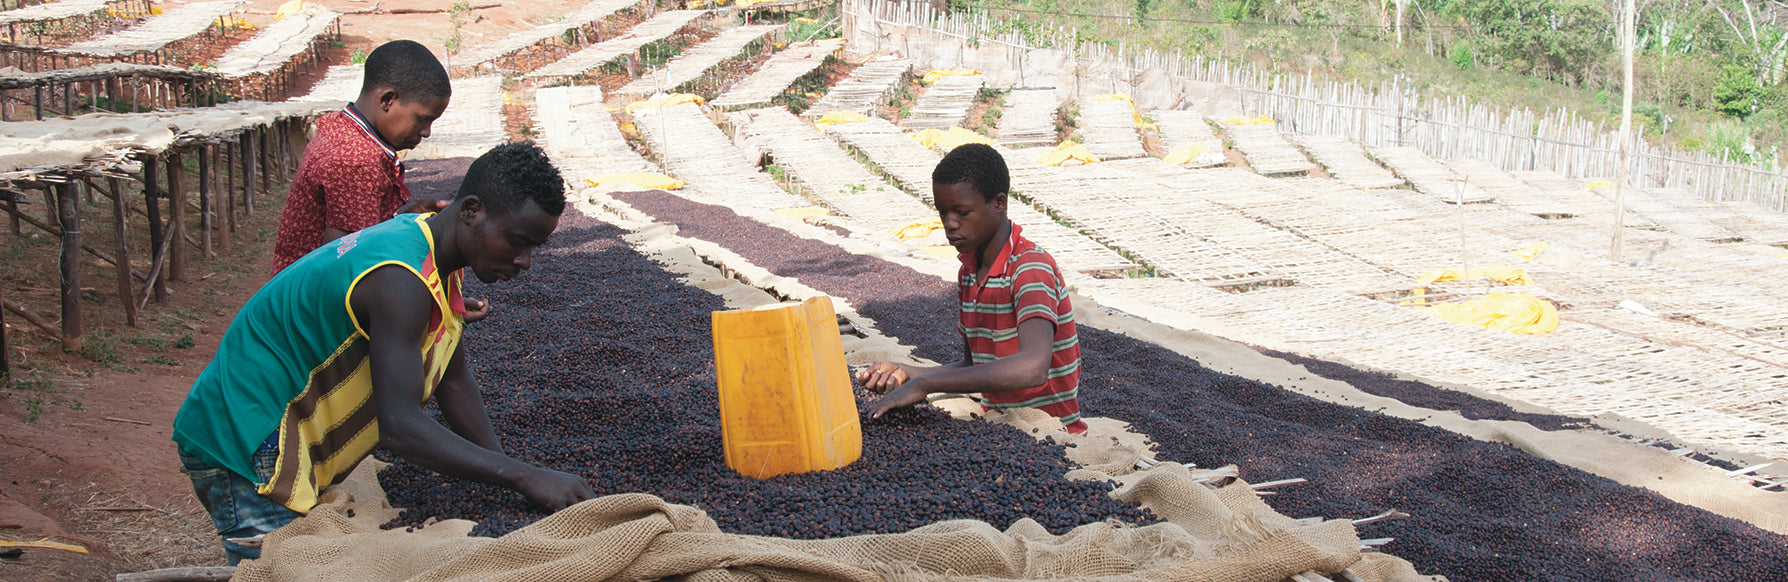 How Does the Entire Coffee Supply Chain Operate?